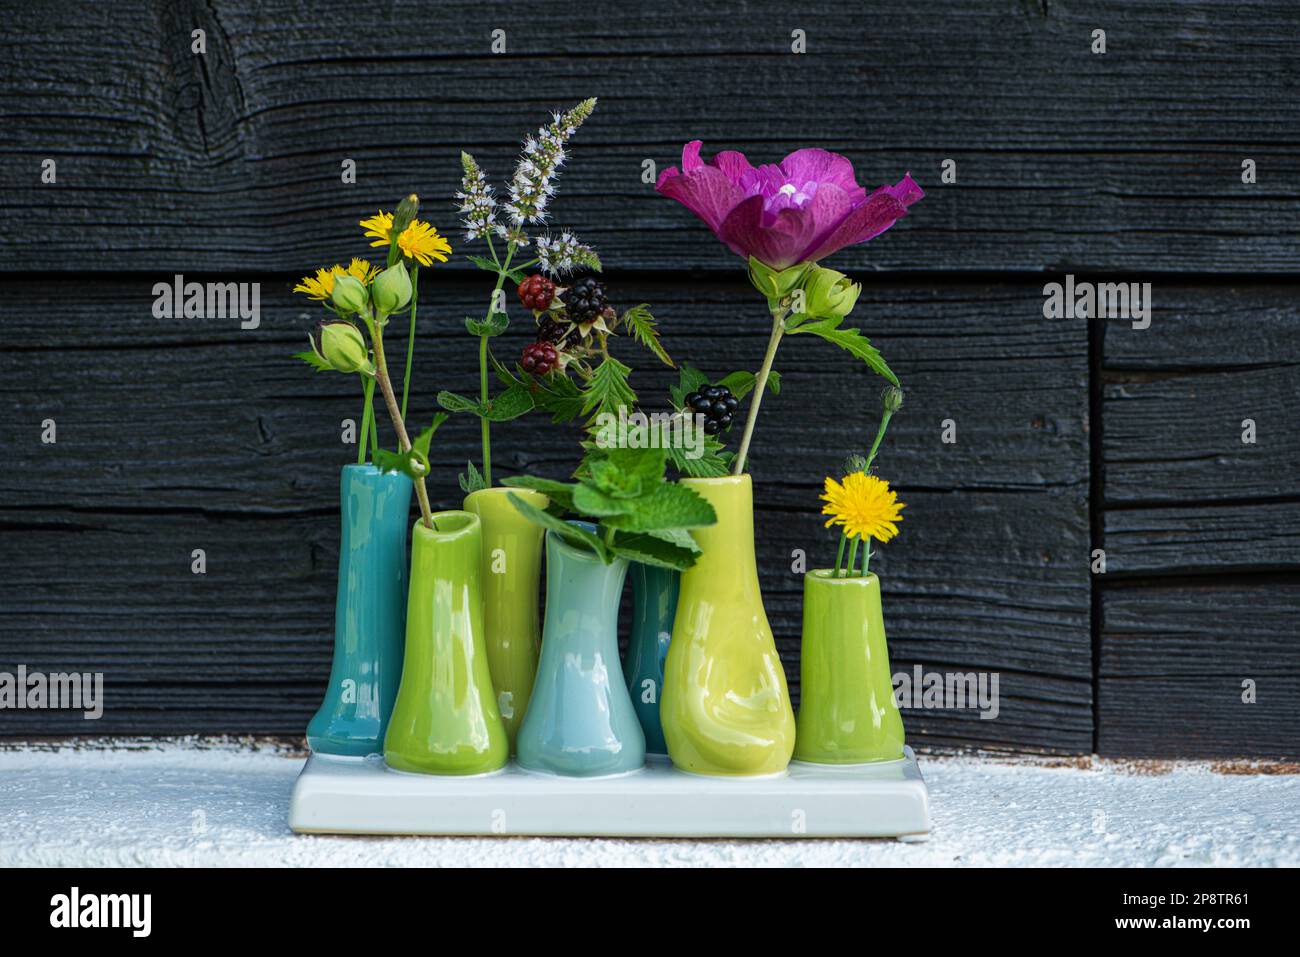 Small vases with blossoms with wooden background Stock Photo